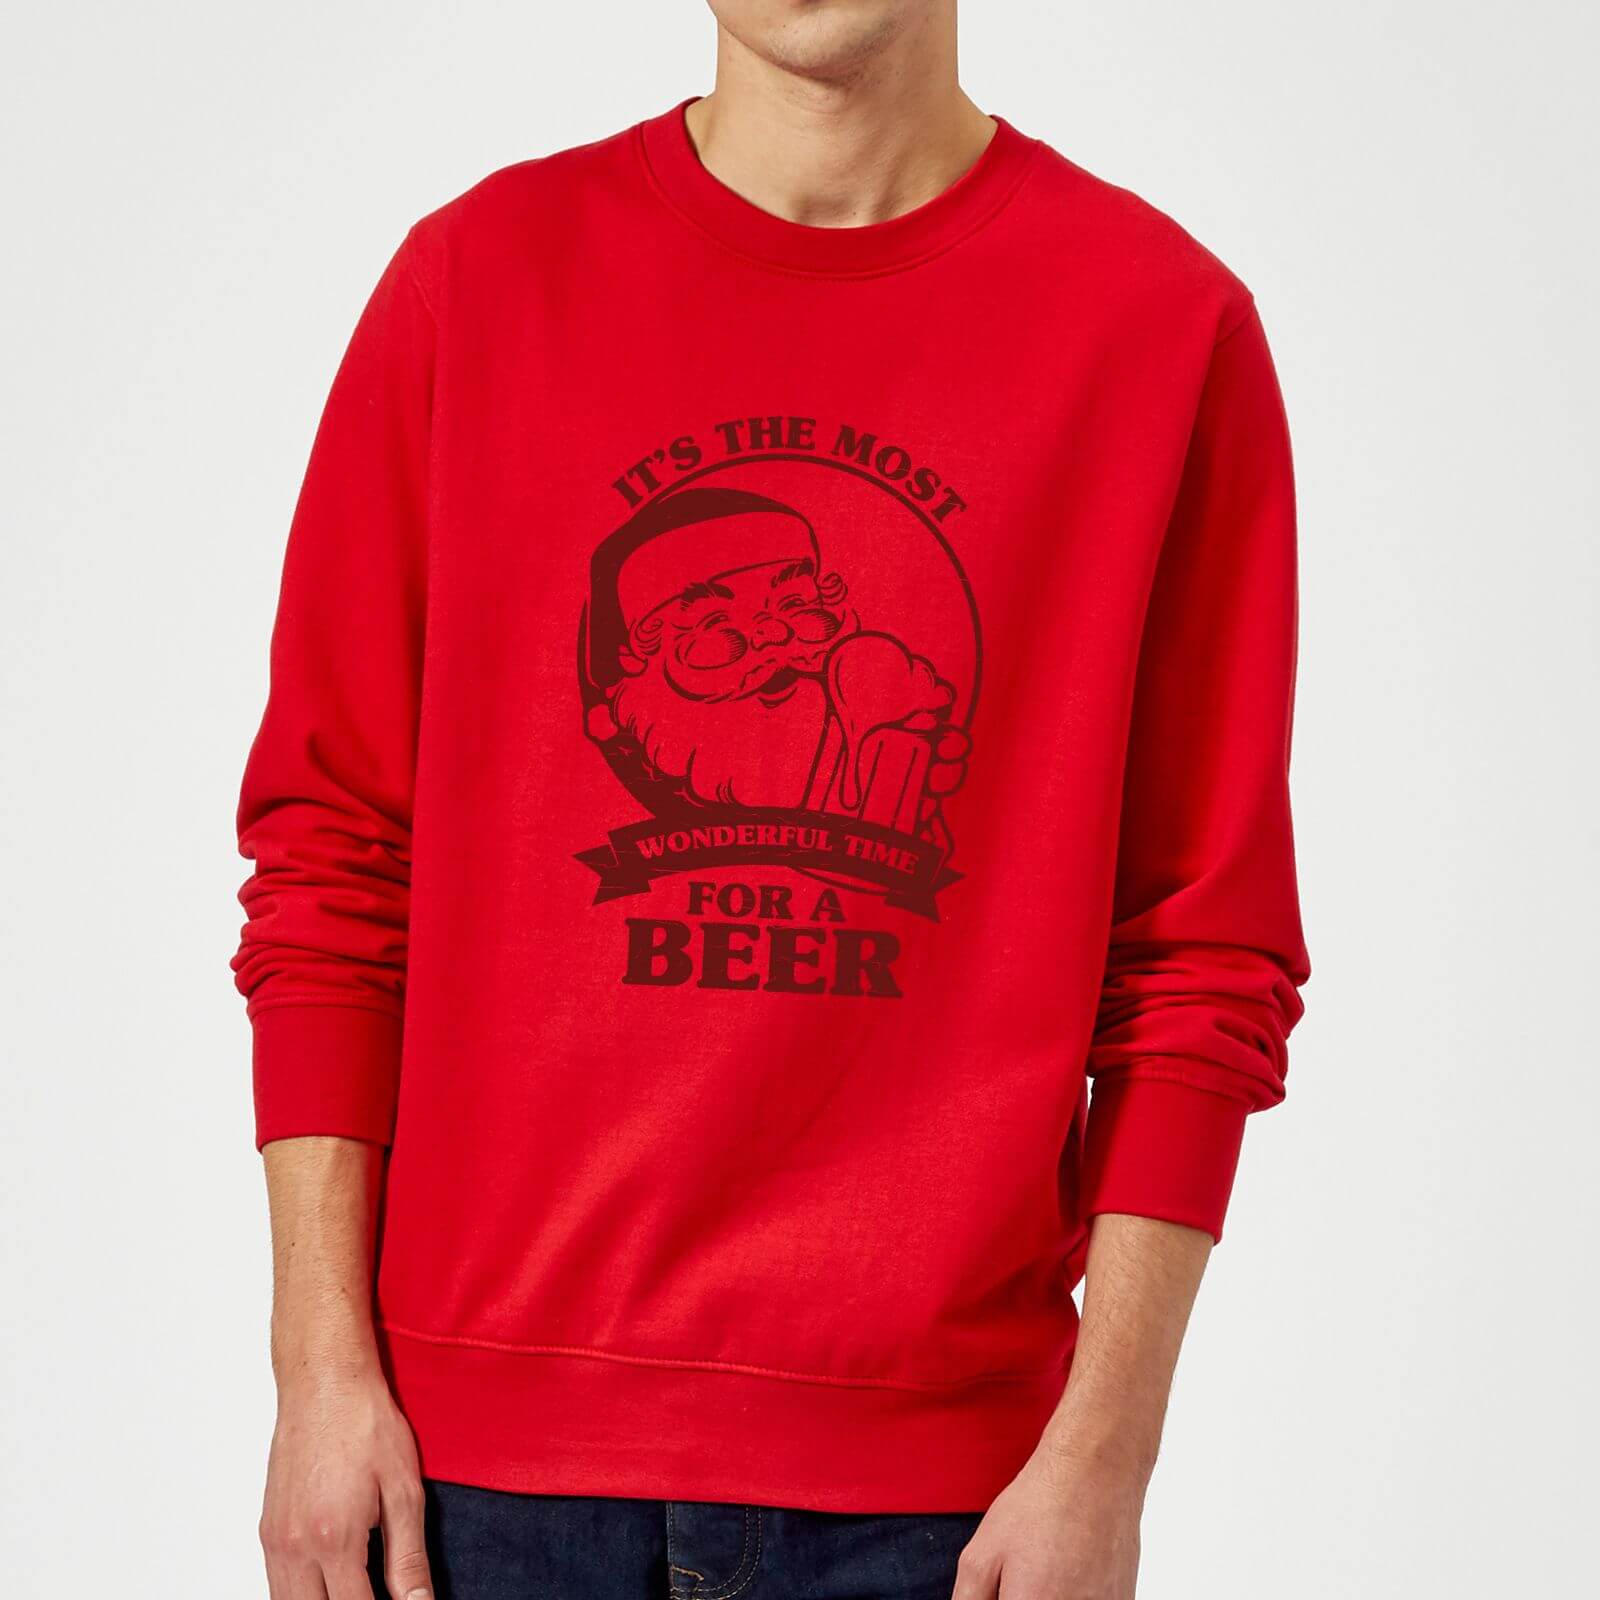 The Most Wonderful Time For A Beer Sweatshirt - Red - M